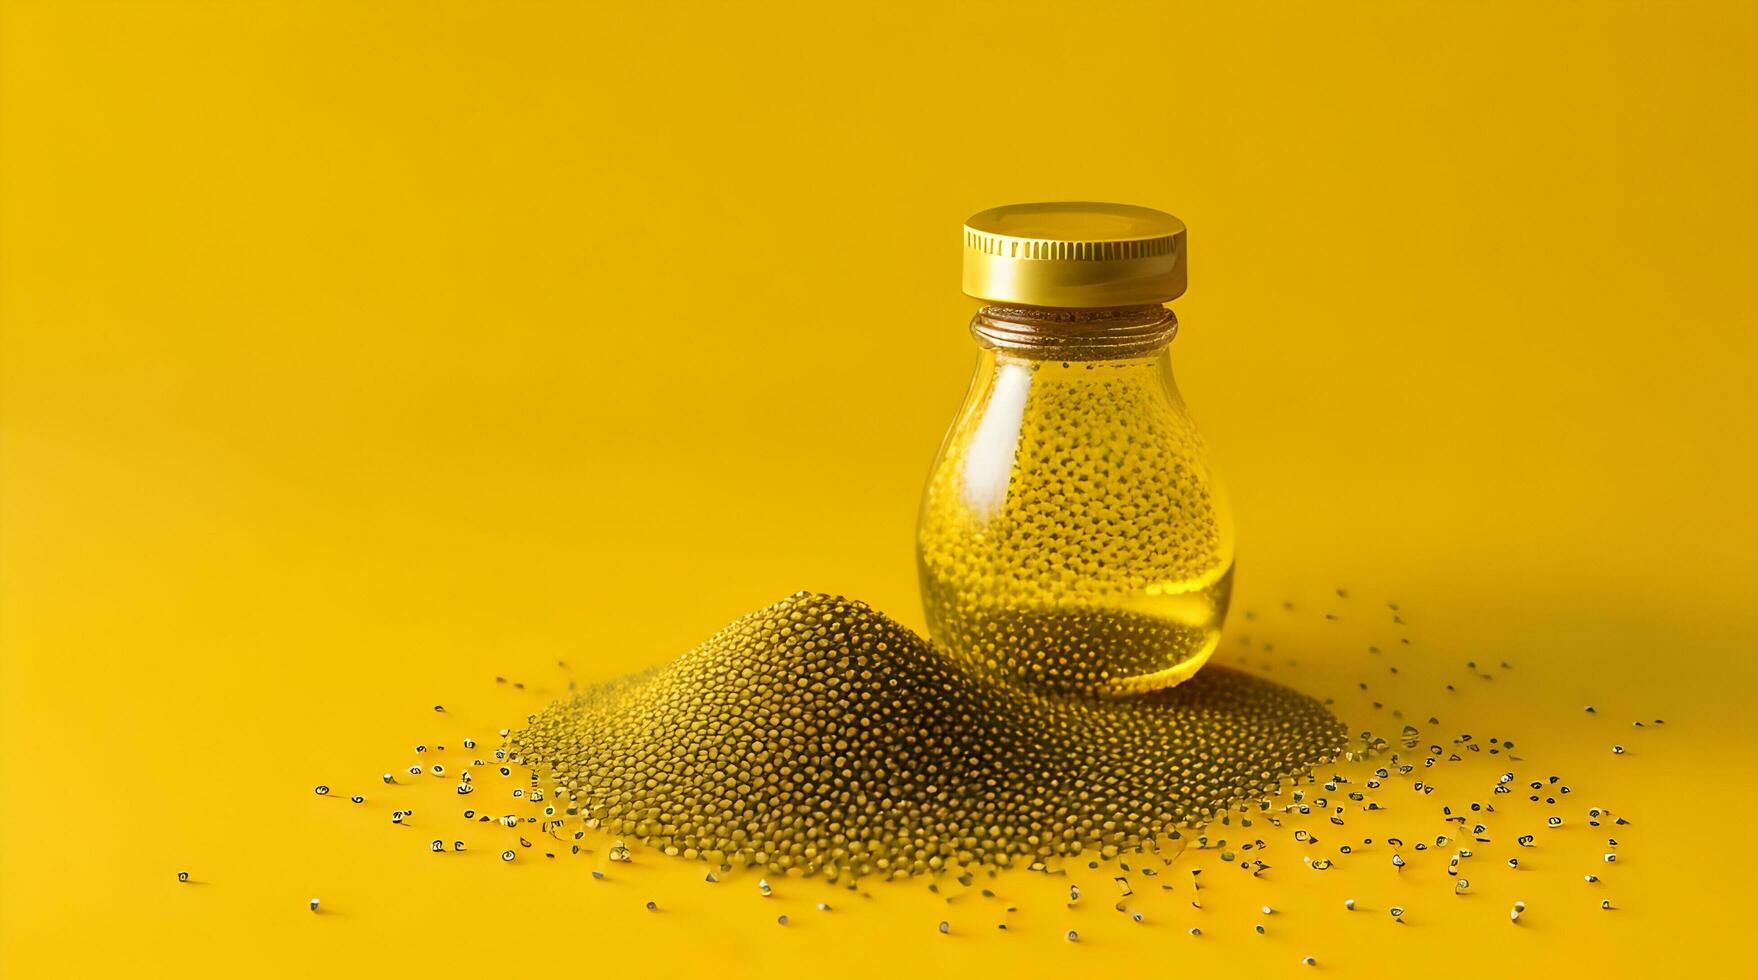 Showcase a promotional image for a mustard oil brand. Use floating mustard seeds and mustard oil to symbolize the natural and flavorful qualities of the product against a green background photo